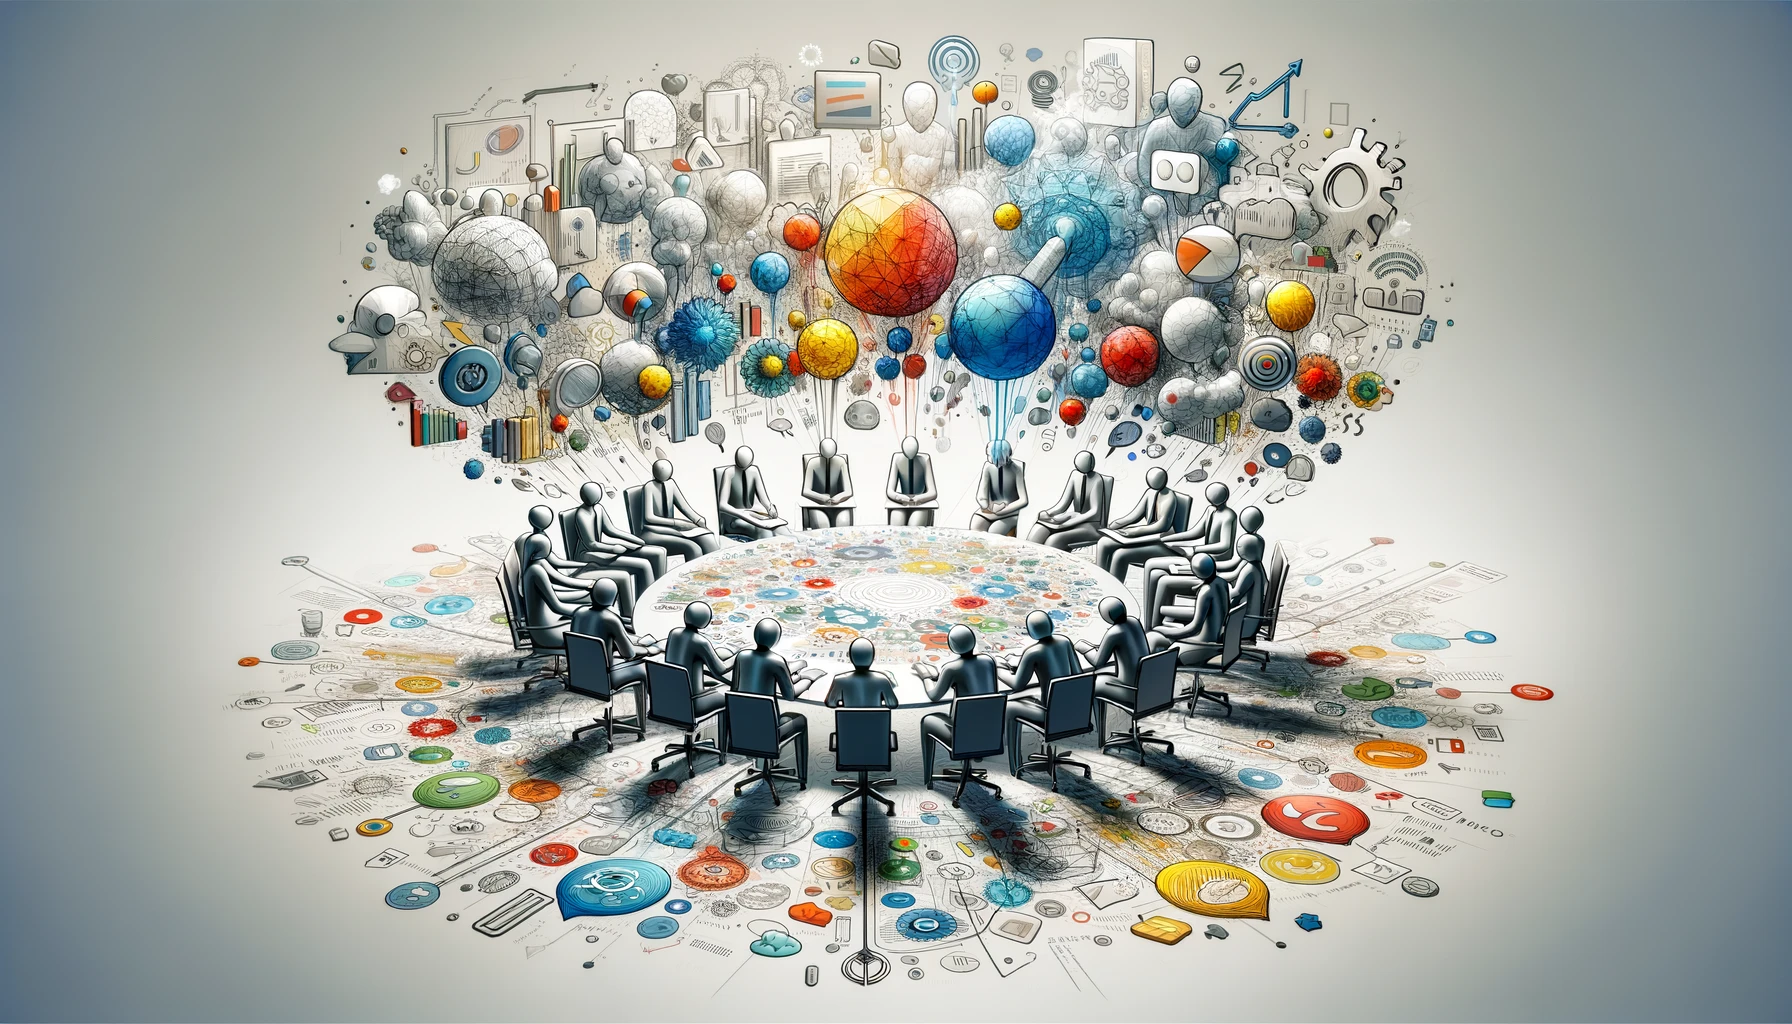 This image illustrates a roundtable discussion among diverse stakeholders in an abstract, conceptual space. Abstract figures representing different roles and perspectives are engaged in dialogue, with floating symbols of ideas, conflicts, connections, and solutions surrounding them. The scene captures the essence of collaboration and diversity in addressing complex social challenges, emphasizing the collective effort necessary in systems thinking. The vibrant color scheme of light gray, dark gray, bright red, yellow, and blue enriches the discussion, highlighting the vibrant and varied nature of collaborative problem-solving in interconnected social systems.